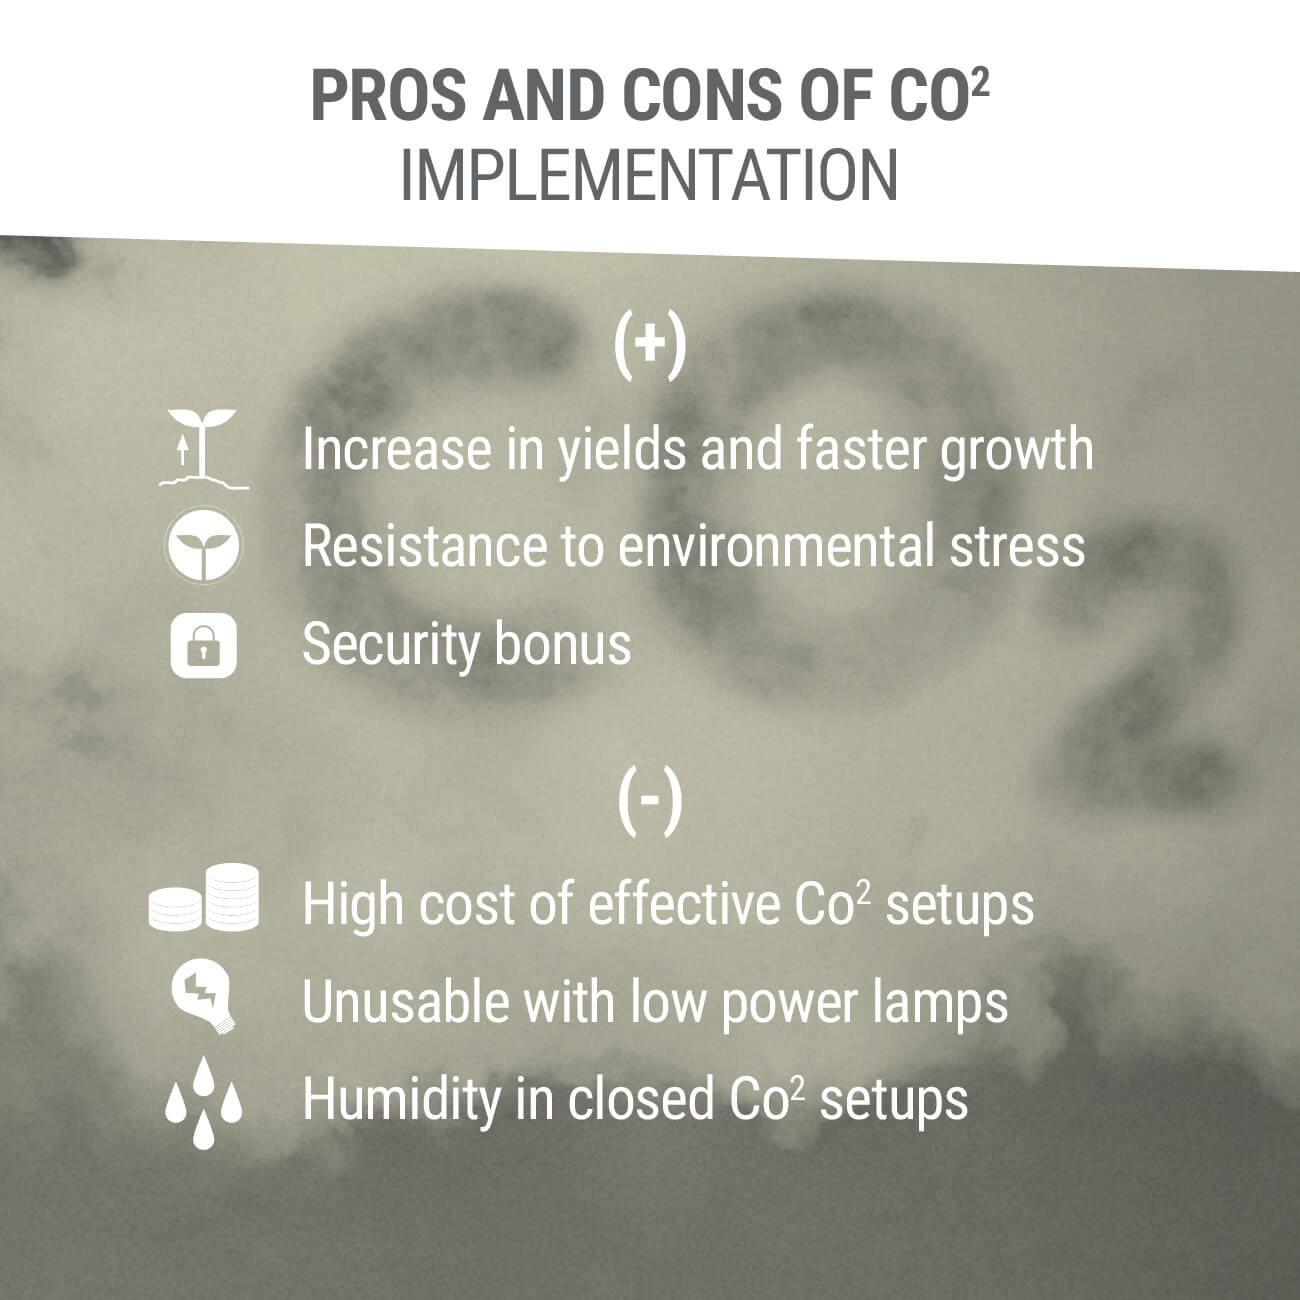 Pros and Cons of CO2 Implementation